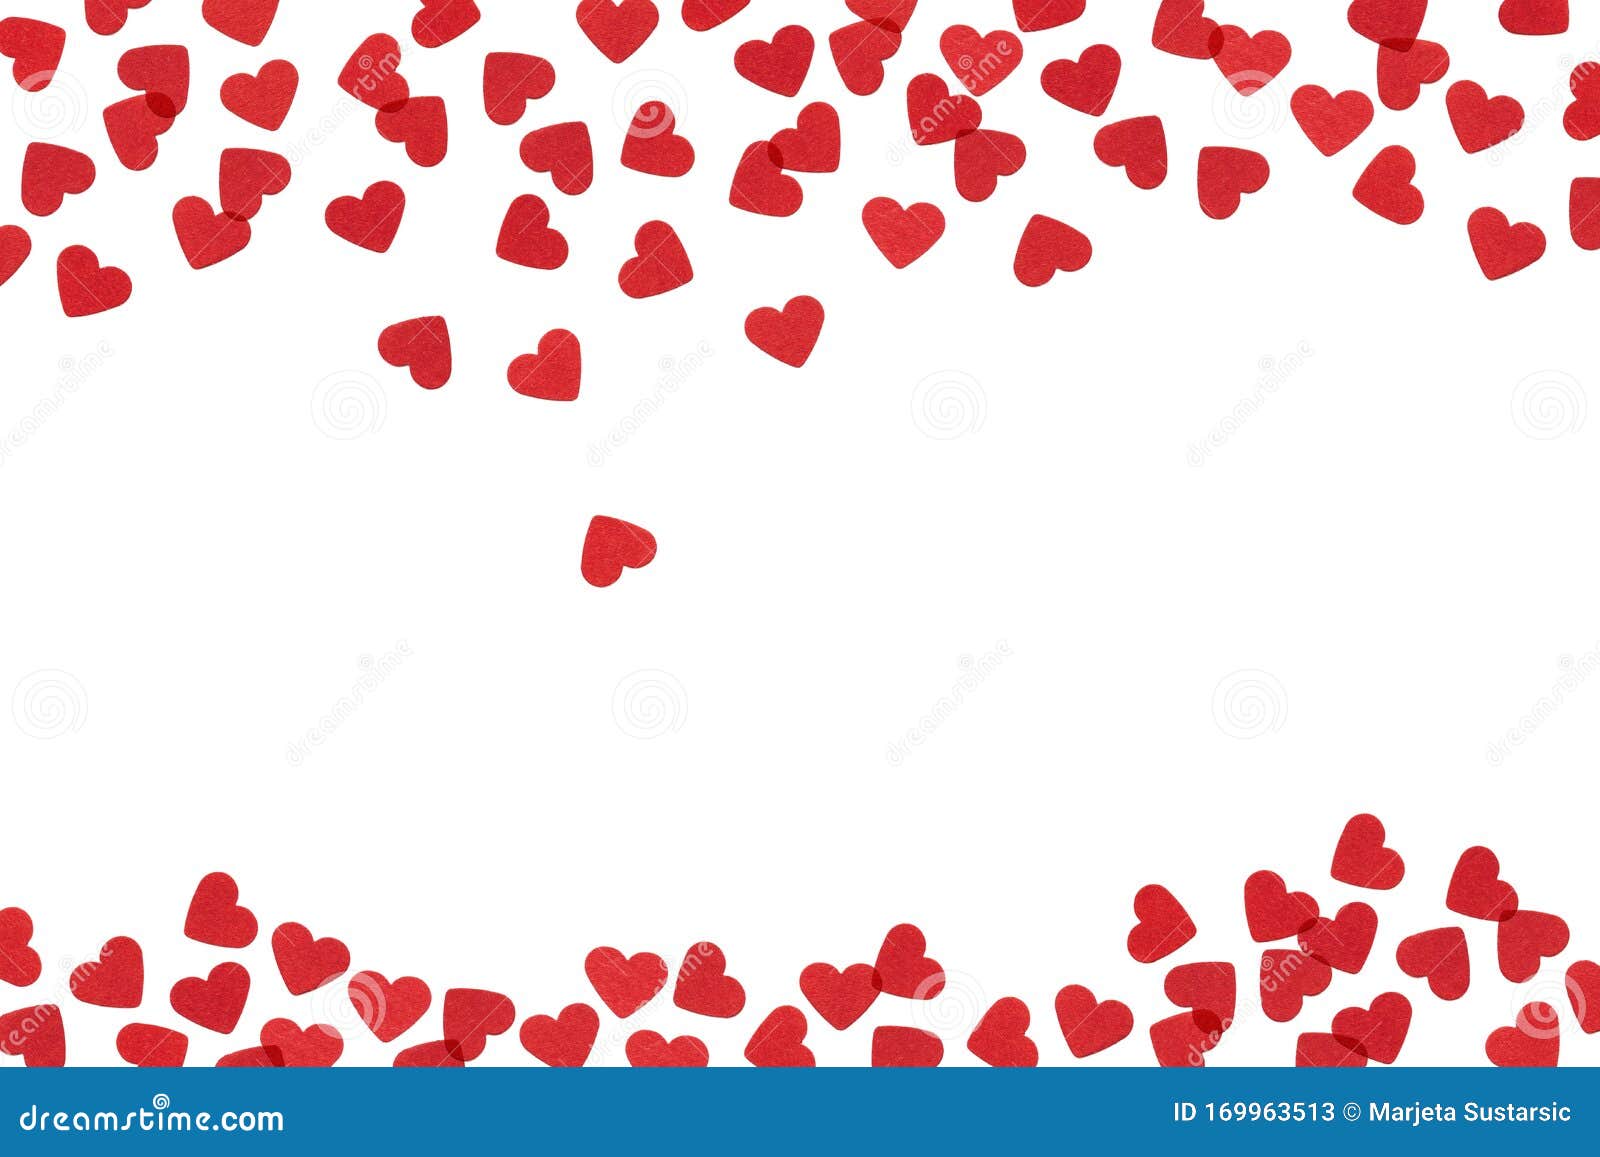 Small Red Hearts on White Background Stock Image - Image of heart, falling:  169963513